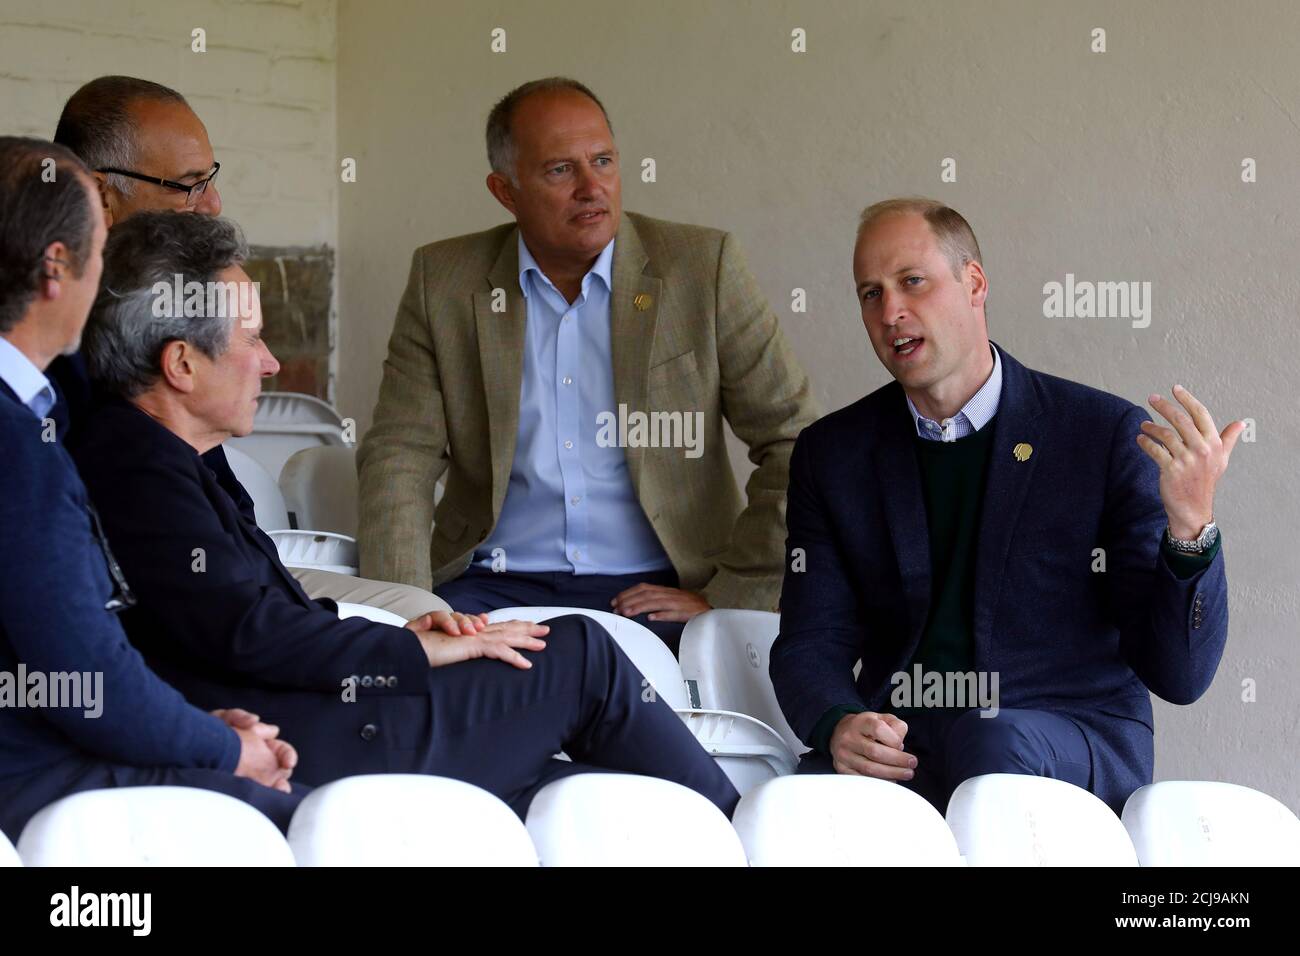 Britain's Prince William, Duke of Cambridge gestures as he speaks to Rob Morris, Co-Owner of Silver Jubilee Park and Vice President of Hendon F.C. and Edgware Town F.C., and club officials during his visit to Hendon FC, as part of the Heads Up mental health campaign at Hendon F.C., in London, Britain September 6, 2019. Tim P. Whitby/Pool via REUTERS Stock Photo